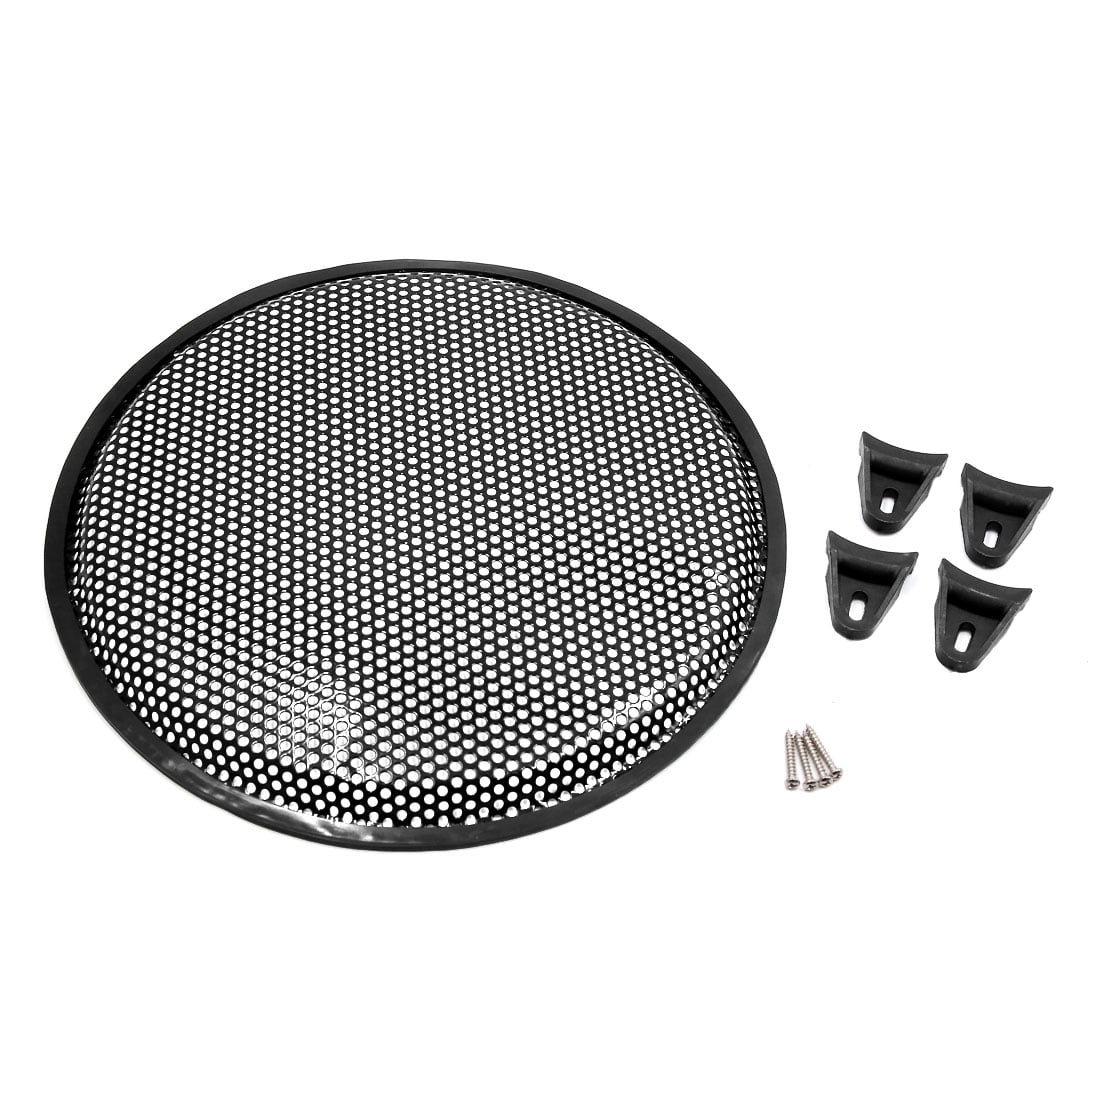 6inch Akozon Speaker Grill,Car Audio Plastic Mesh Cover Woofer Speaker Modification Protect Guard 